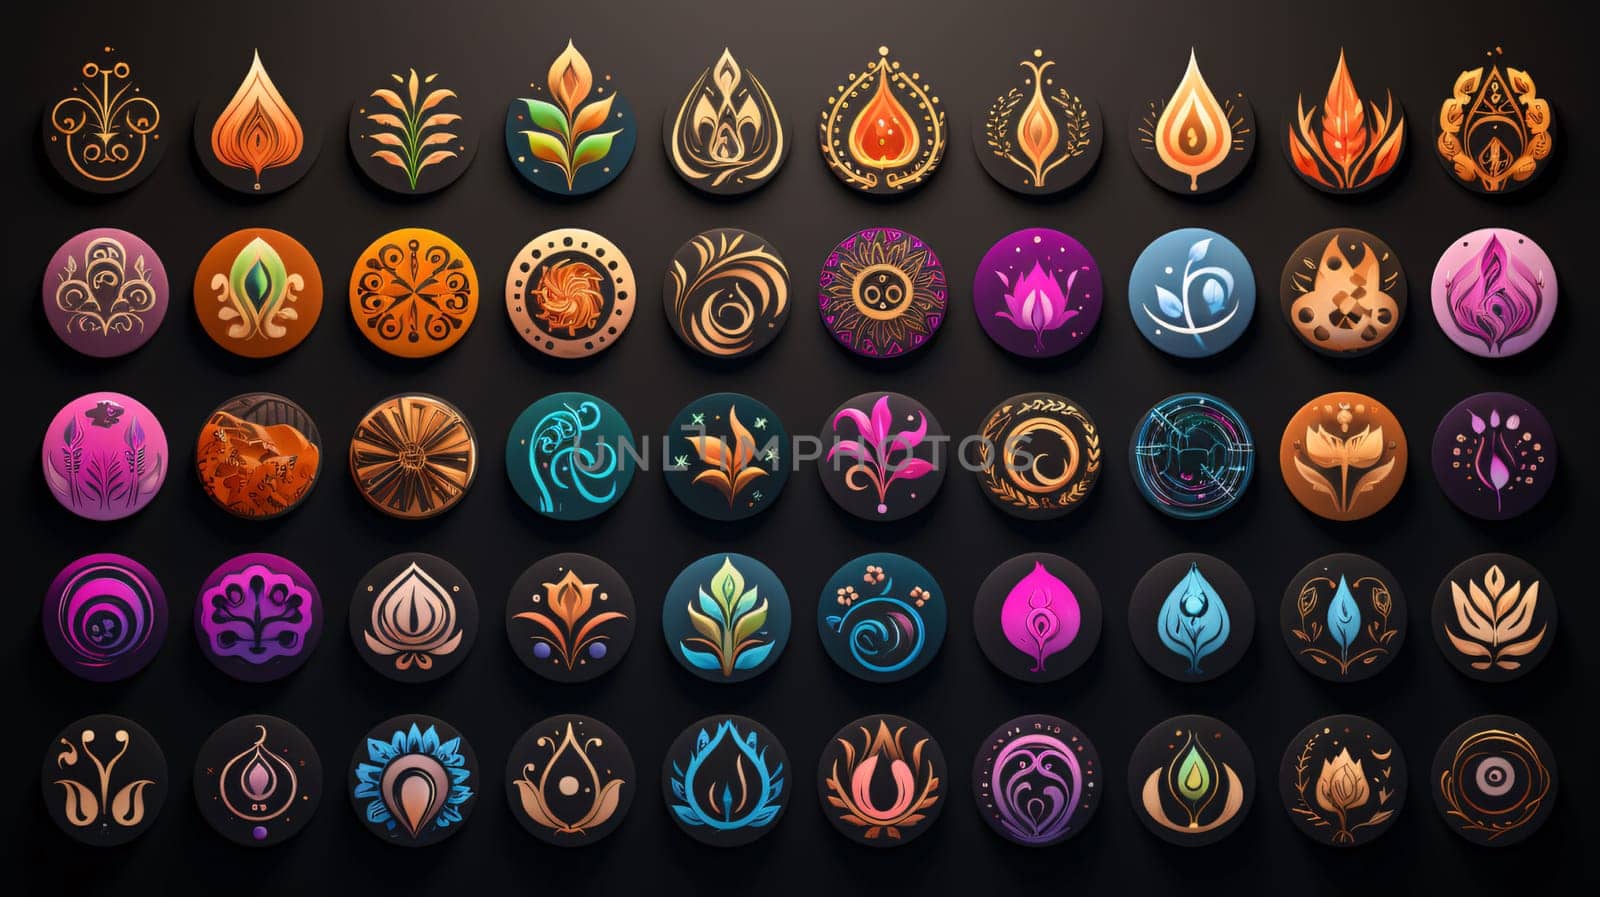 New icons collection: Set of ornate icons for yoga and meditation. Vector illustration. Set of indian symbols and icons. Vector illustration. EPS 10